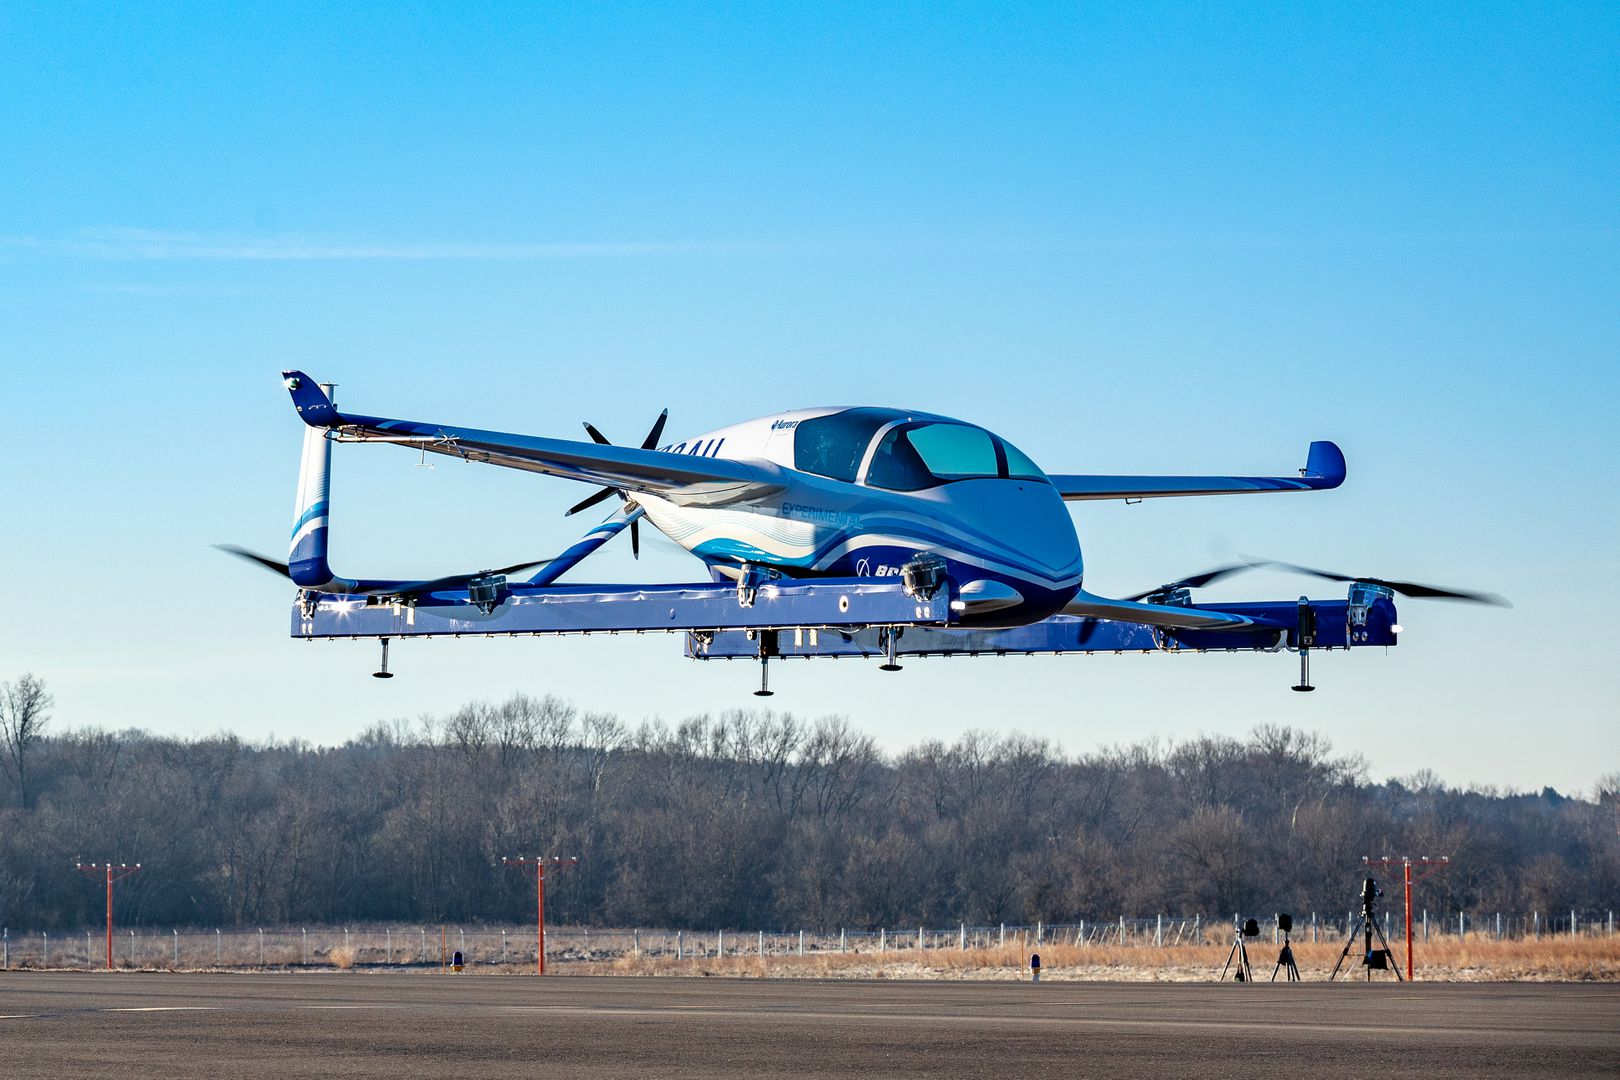 Boeing's experimental autonomous aircraft completes its first test flight - The Verge